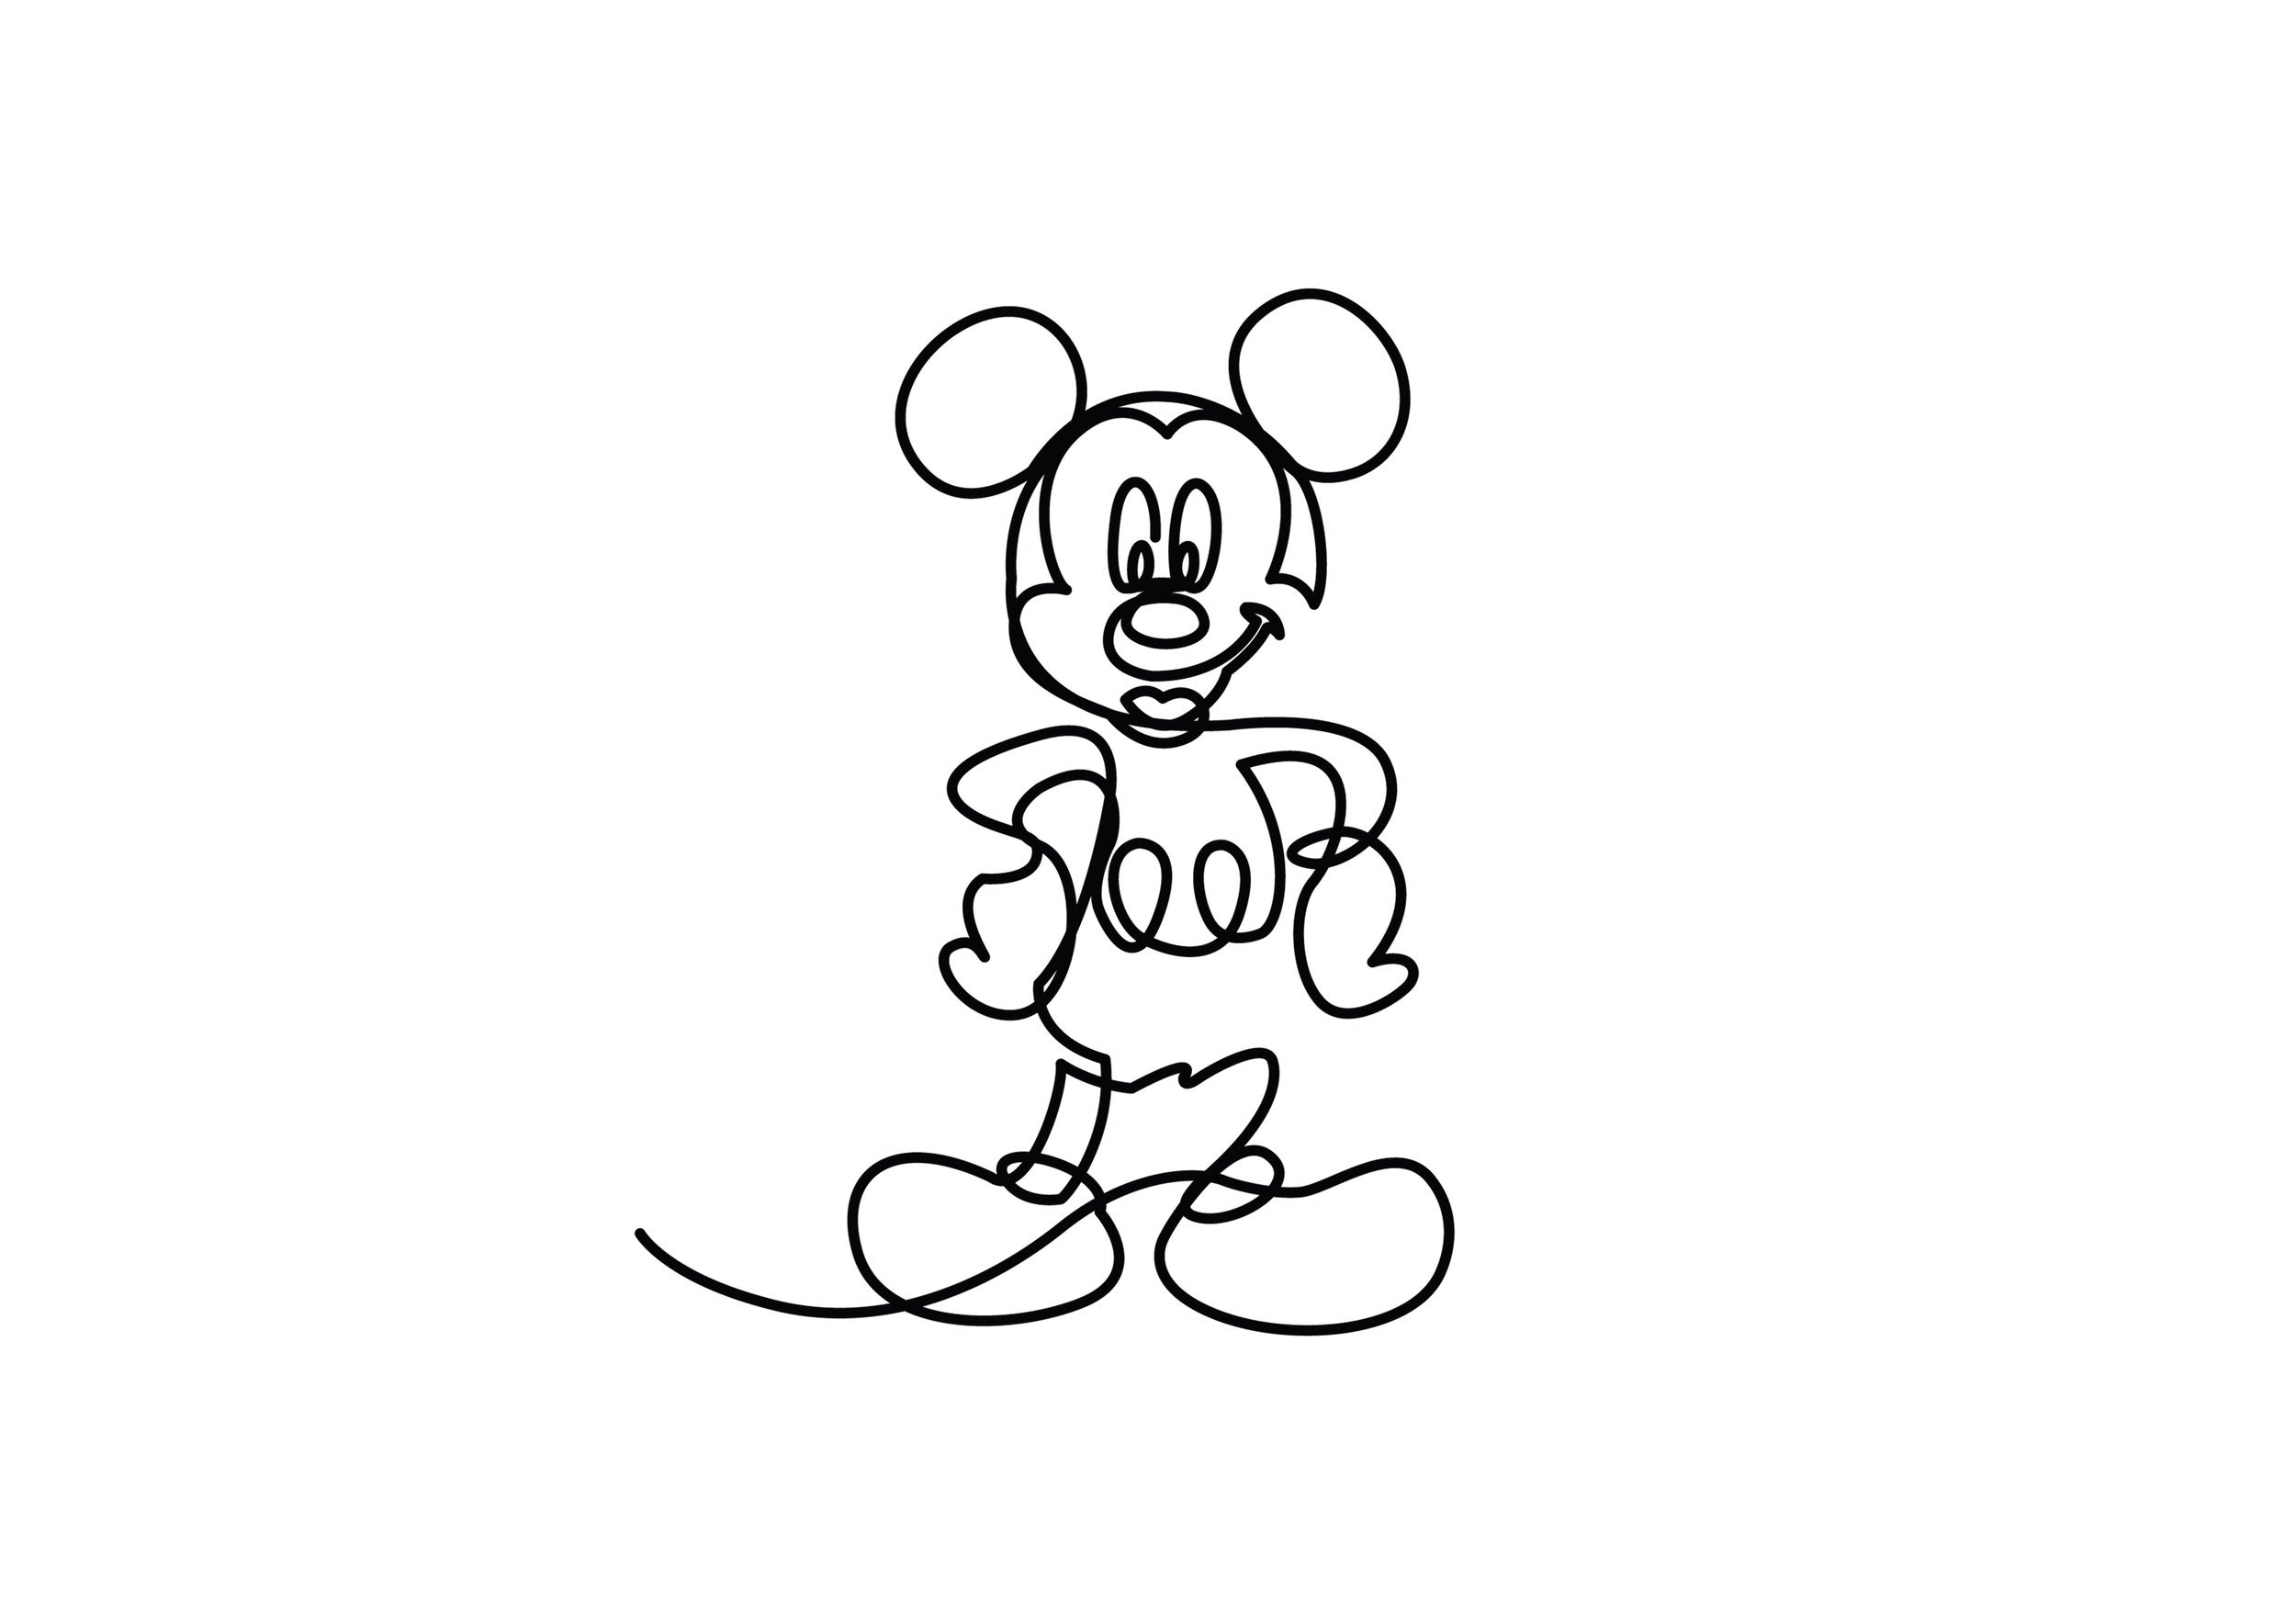 10+mickey+continuous+line.jpg